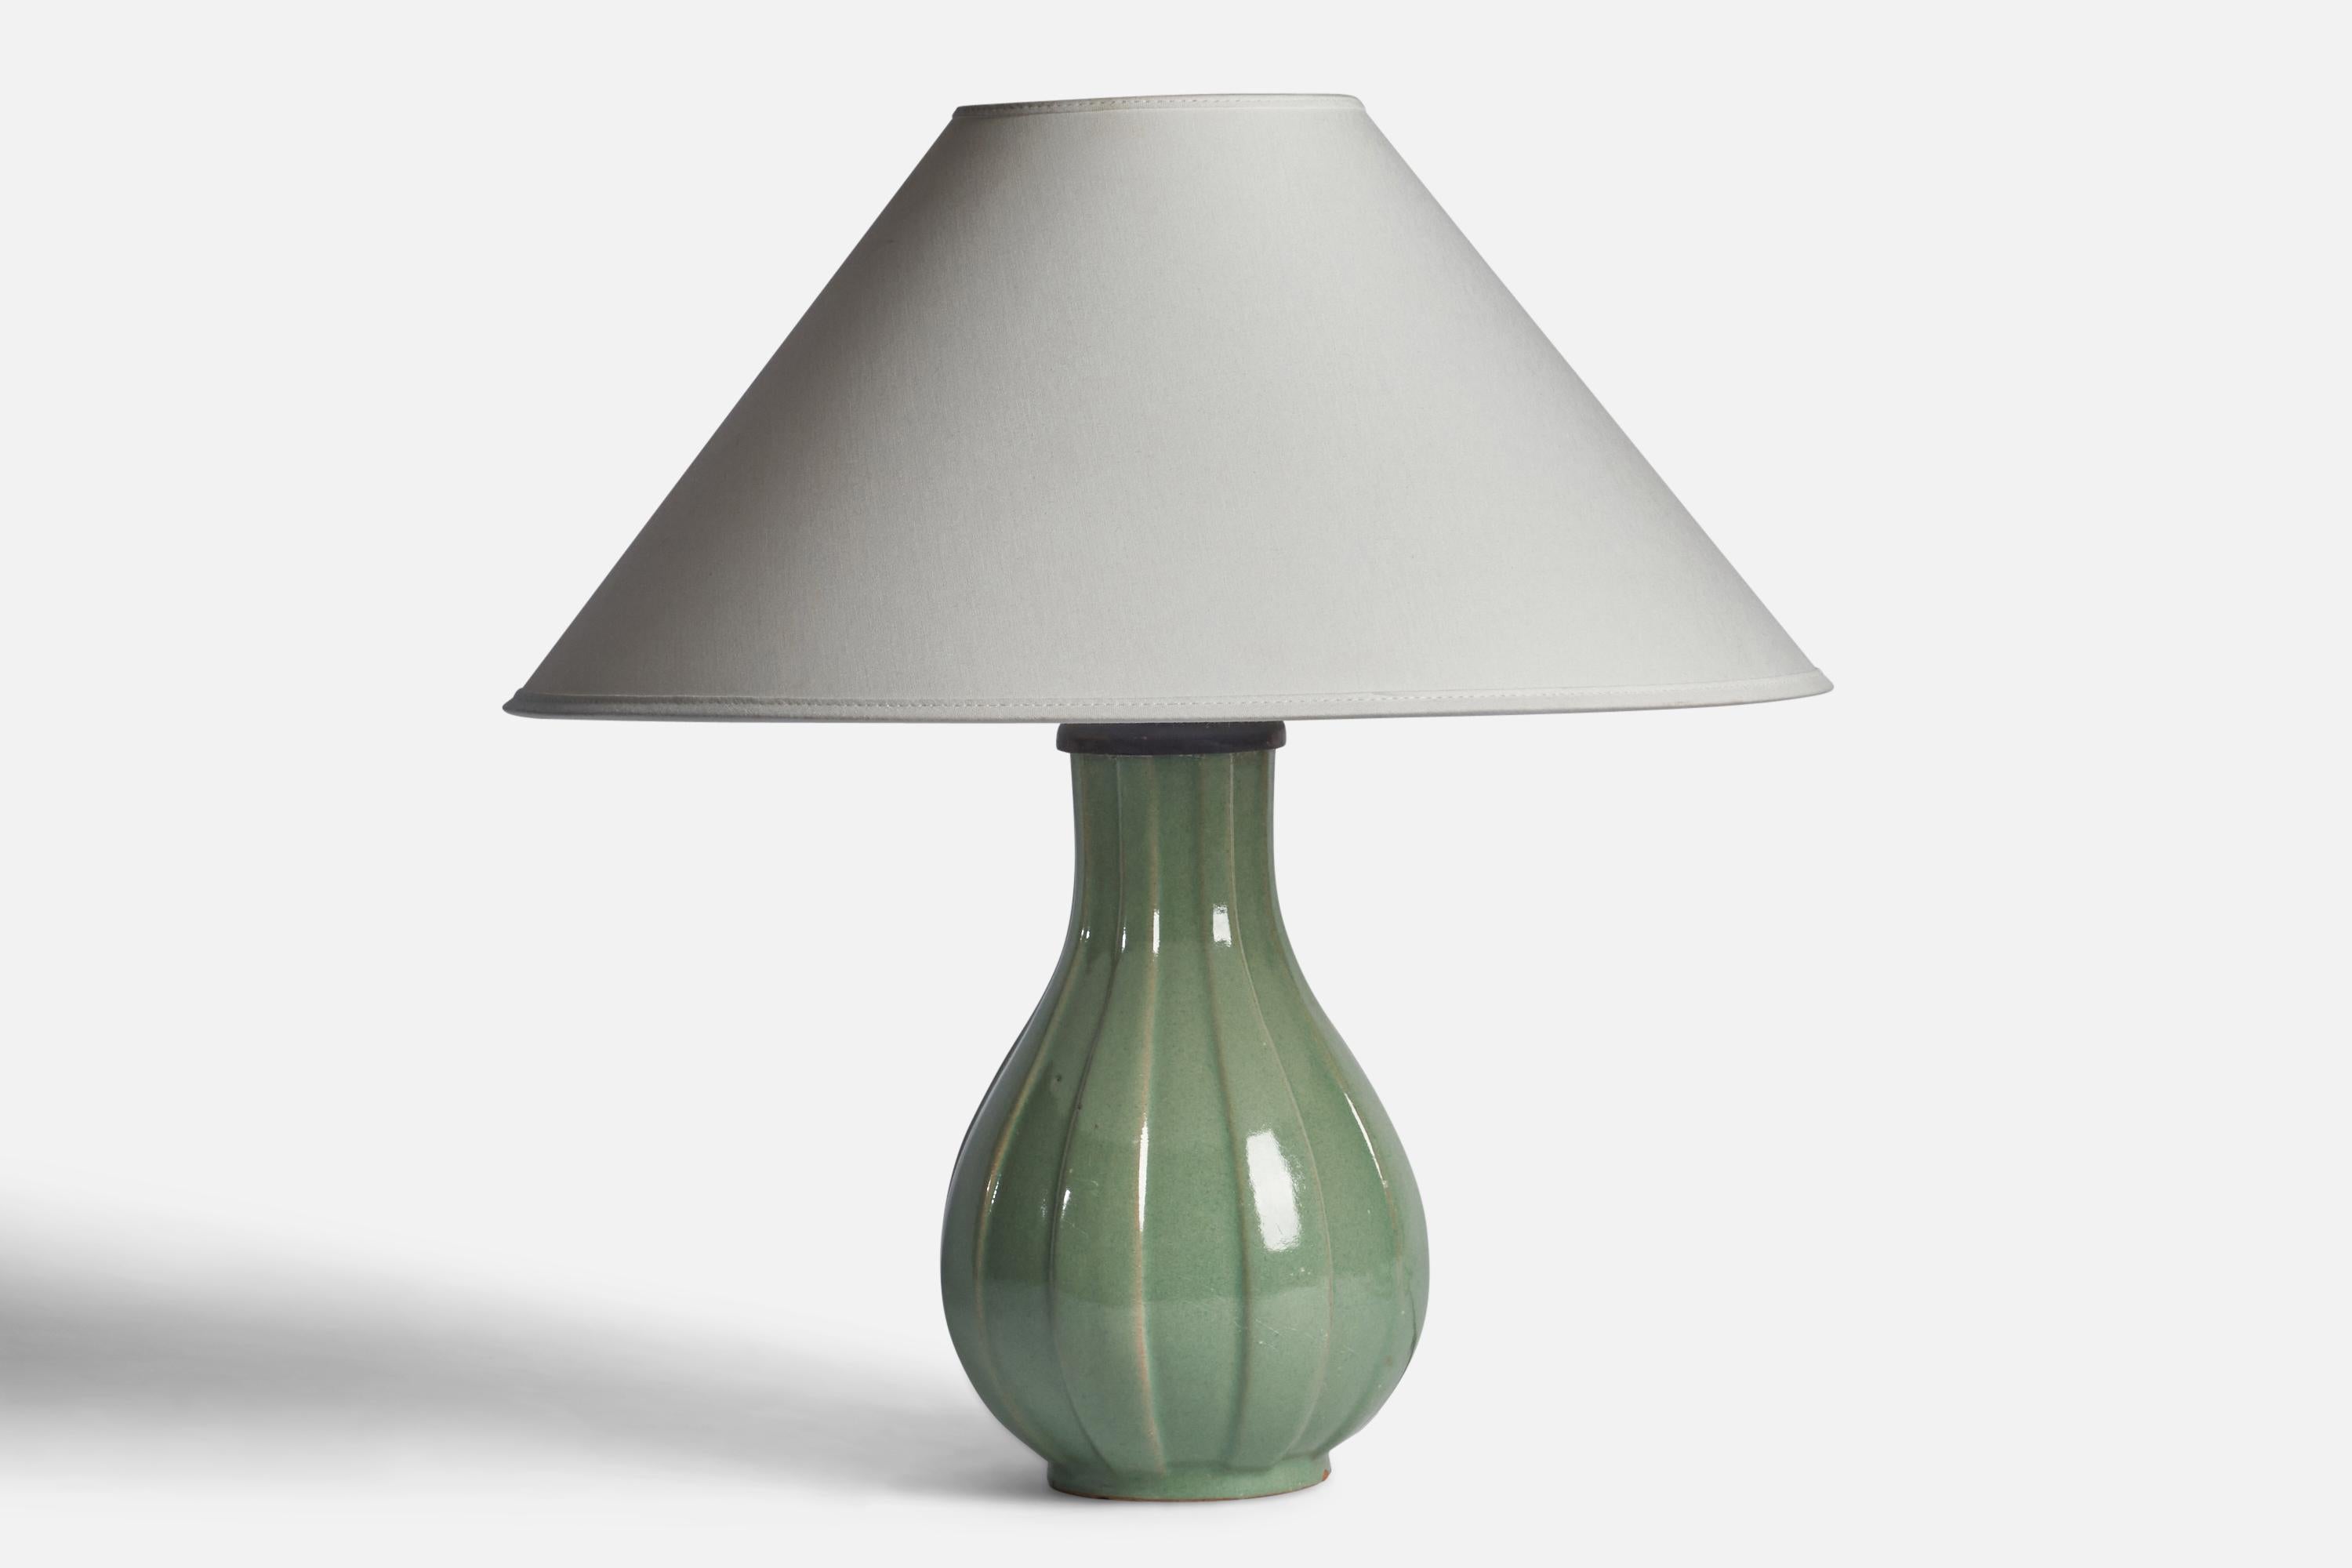 A green-glazed earthenware table lamp designed and produced by Upsala Ekeby, Sweden, 1930s.

“L” stamp on bottom

Dimensions of Lamp (inches): 12” H x 6.25” Diameter
Dimensions of Shade (inches): 4.5” Top Diameter x 16” Bottom Diameter x 9”